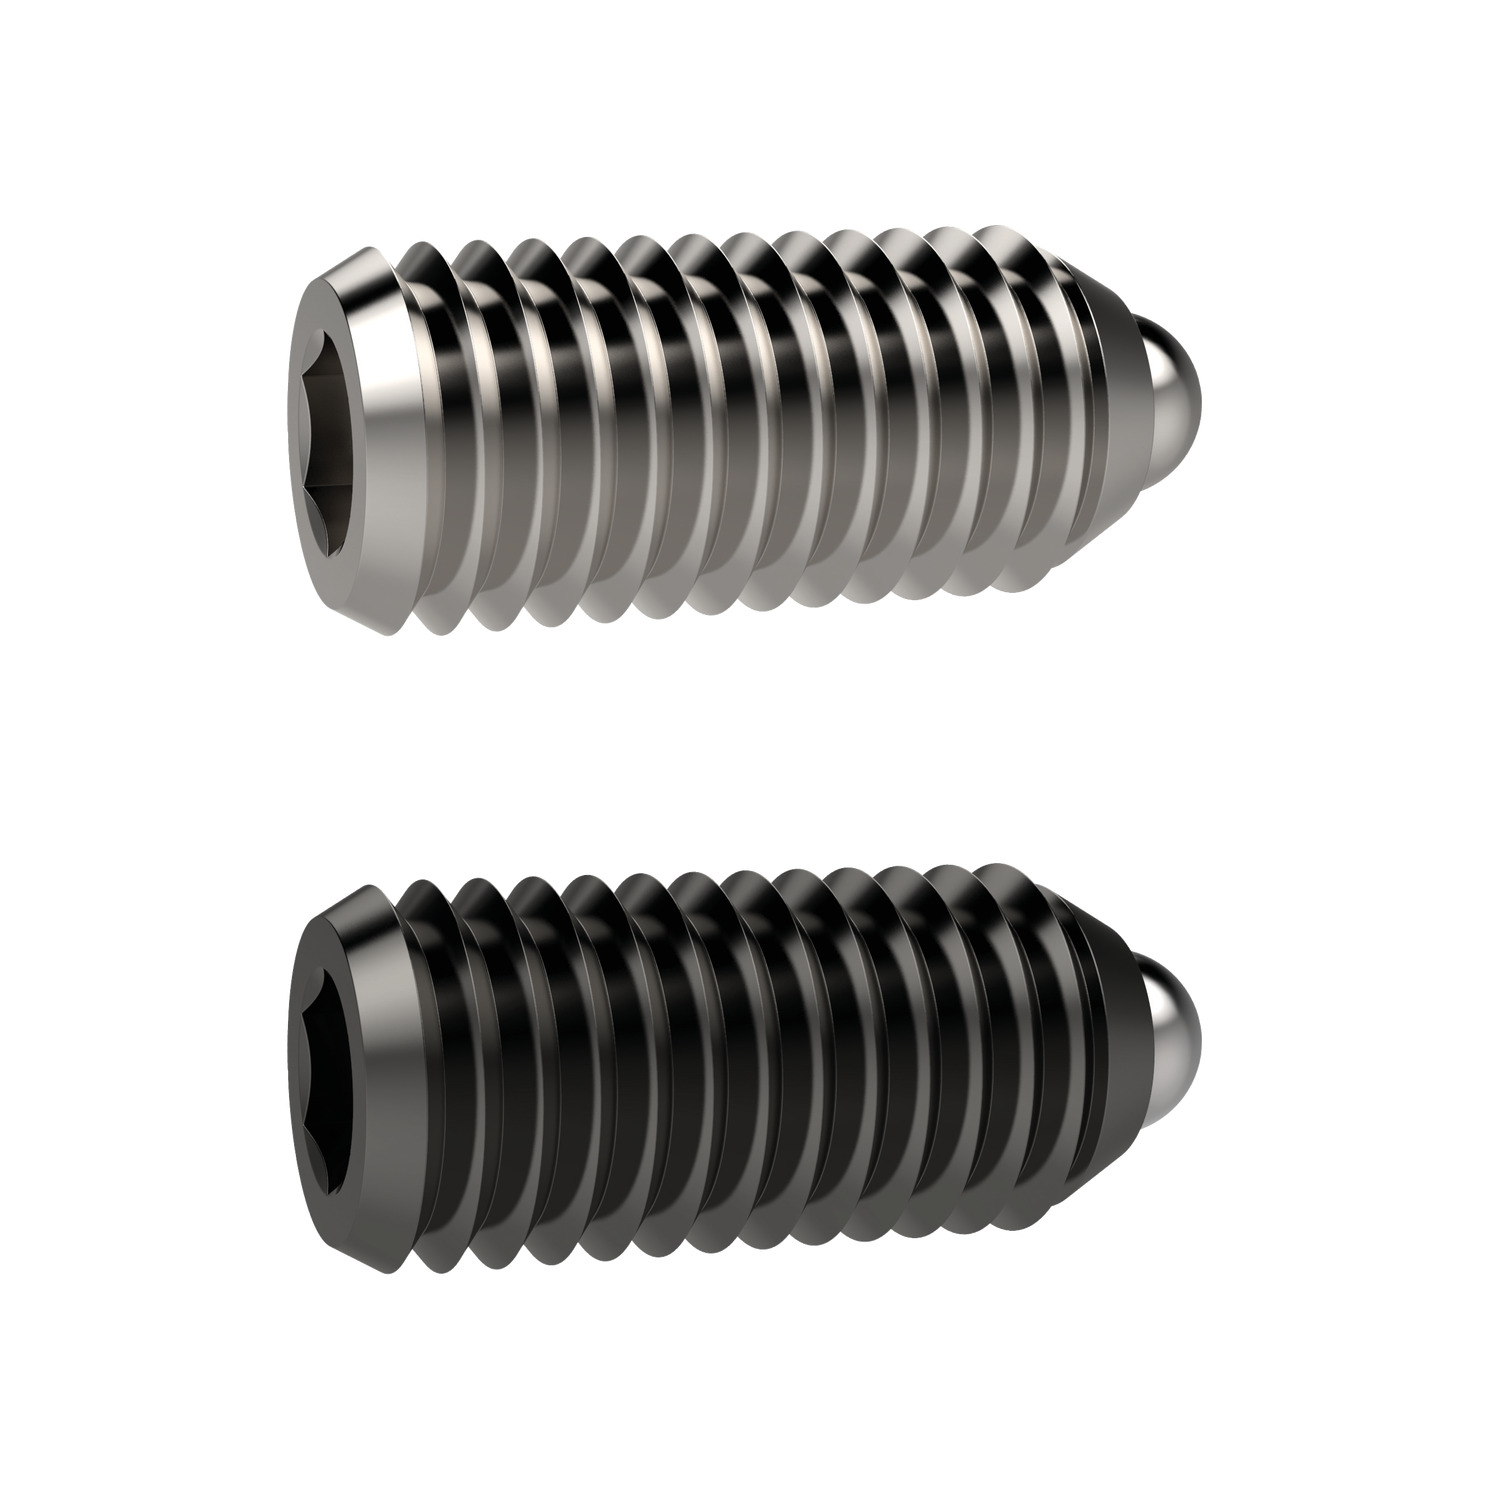 Spring Plungers A hex socket spring plunger with an indexing pin, available in free cutting steel & stainless steel. Increased spring forces included within the standard range.